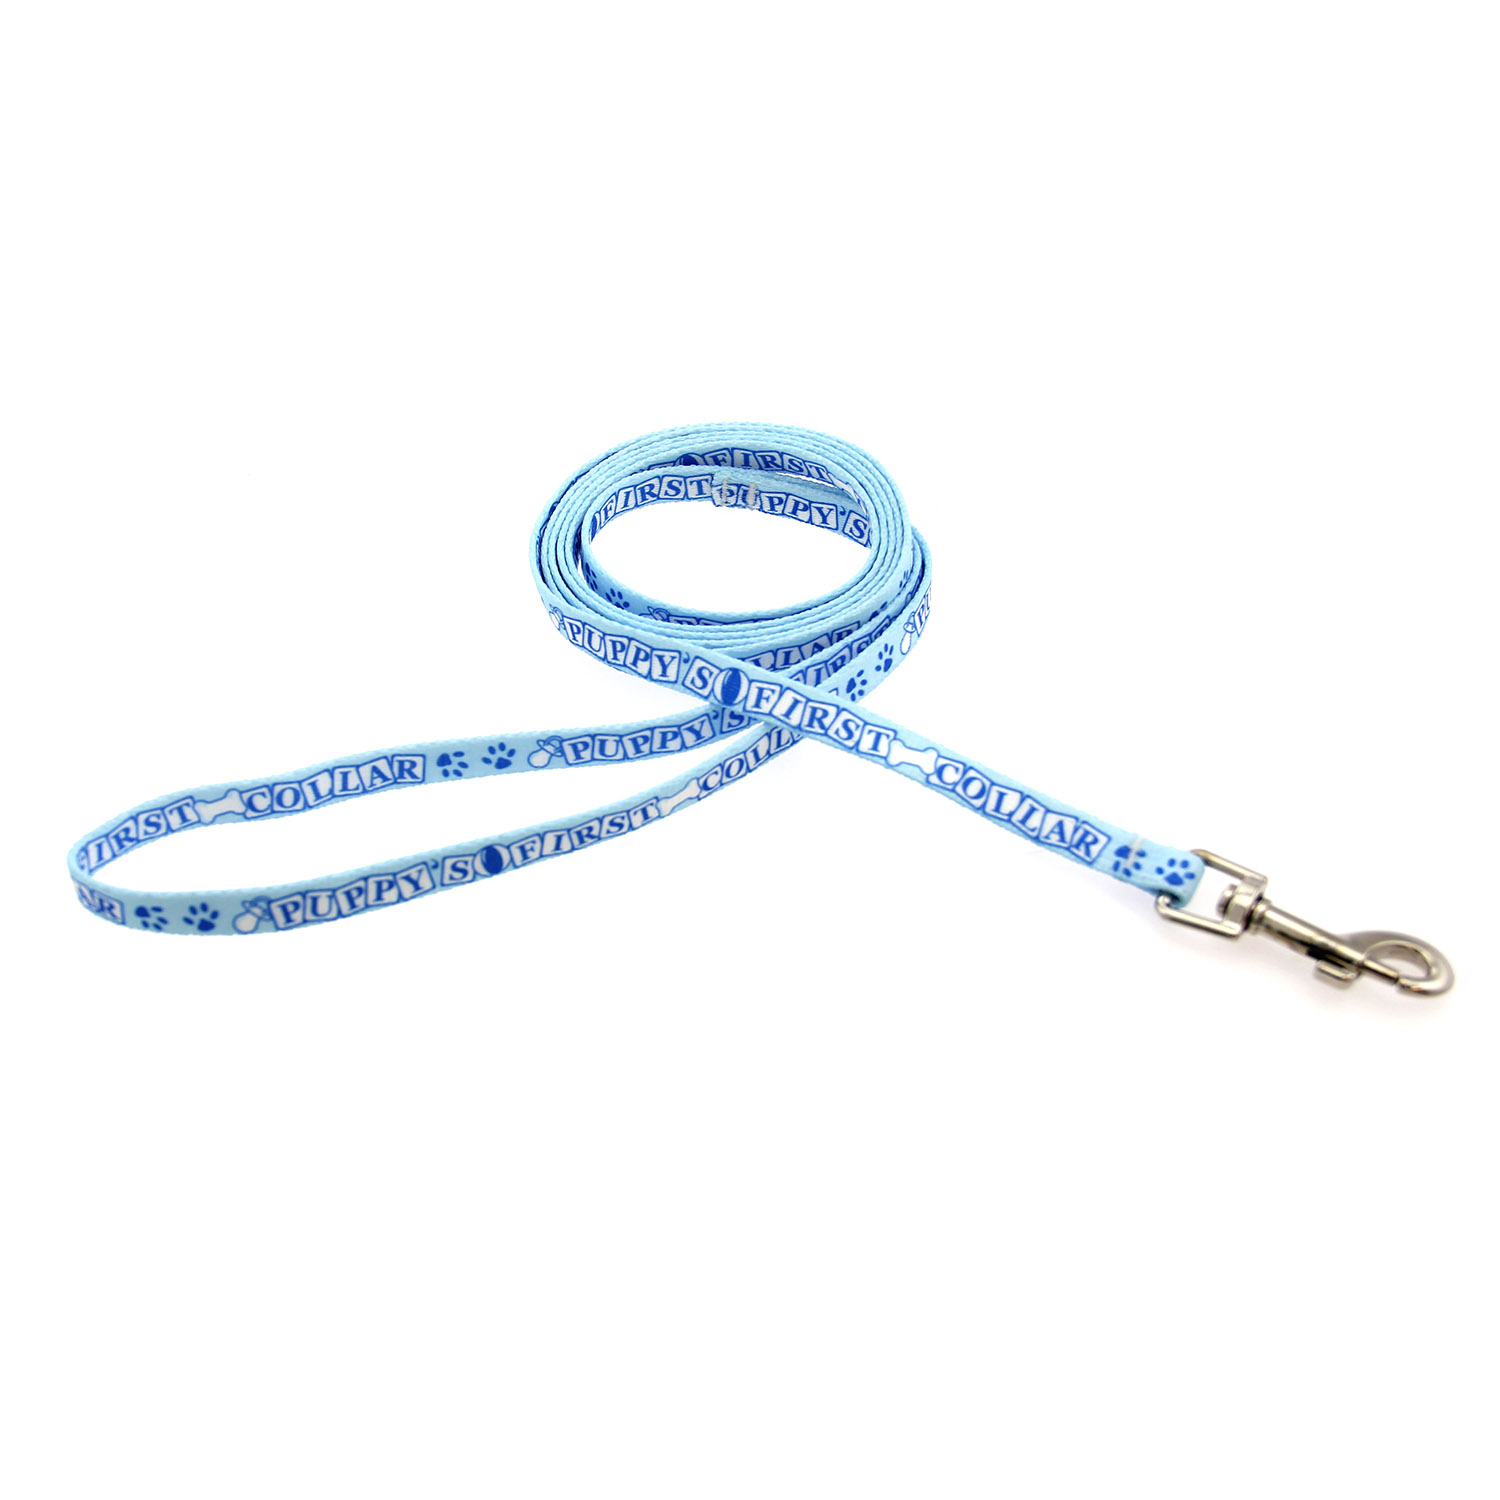 Puppy's First Dog Leash by Yellow Dog - Blue